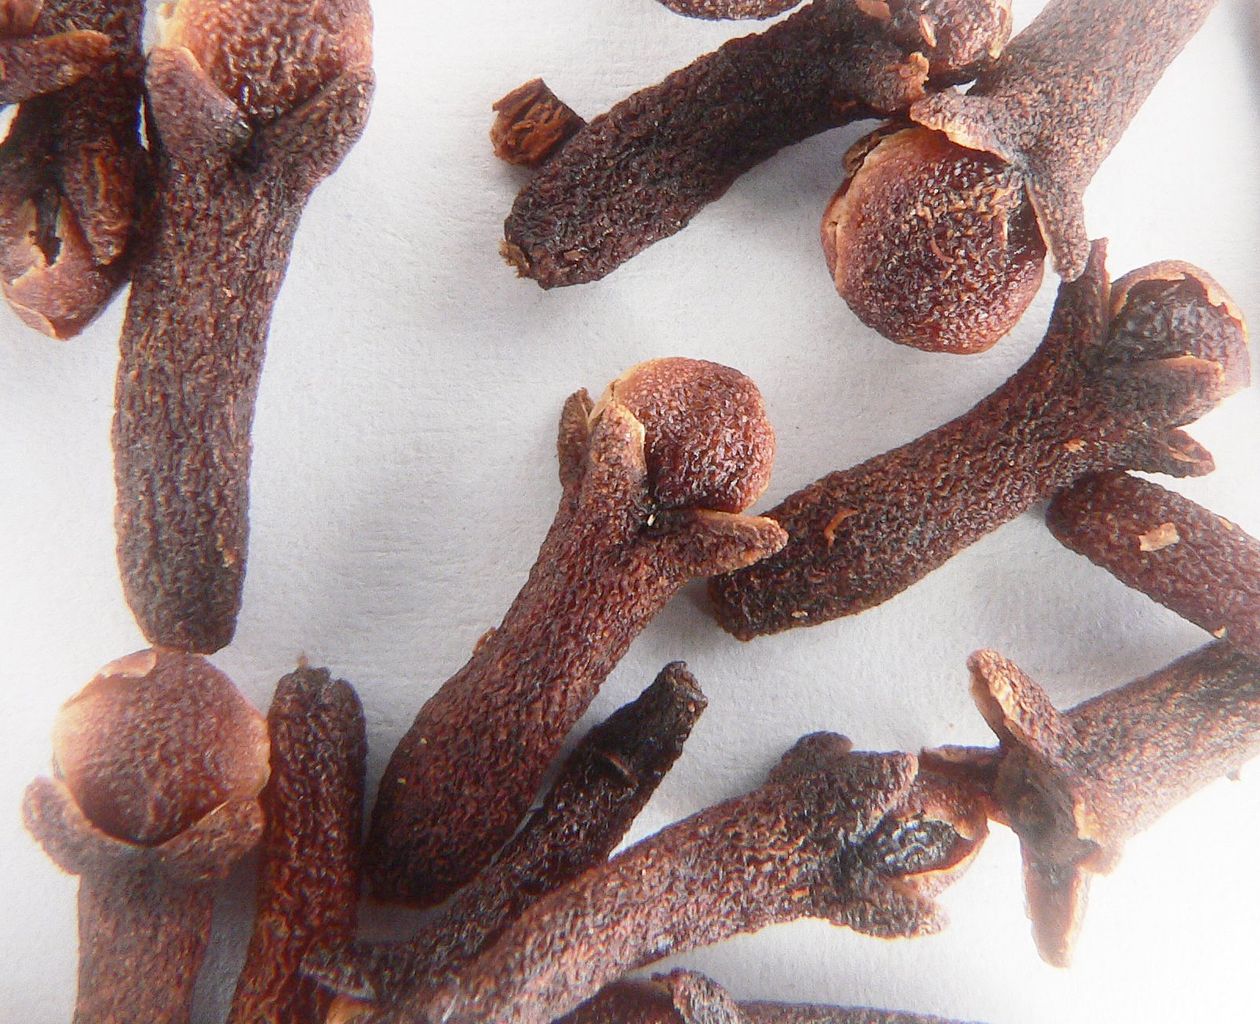 Dried cloves. Photo by David Monniaux (https://commons.wikimedia.org/wiki/File:Cloves_p1160011.jpg), https://creativecommons.org/licenses/by-sa/3.0/legalcode.